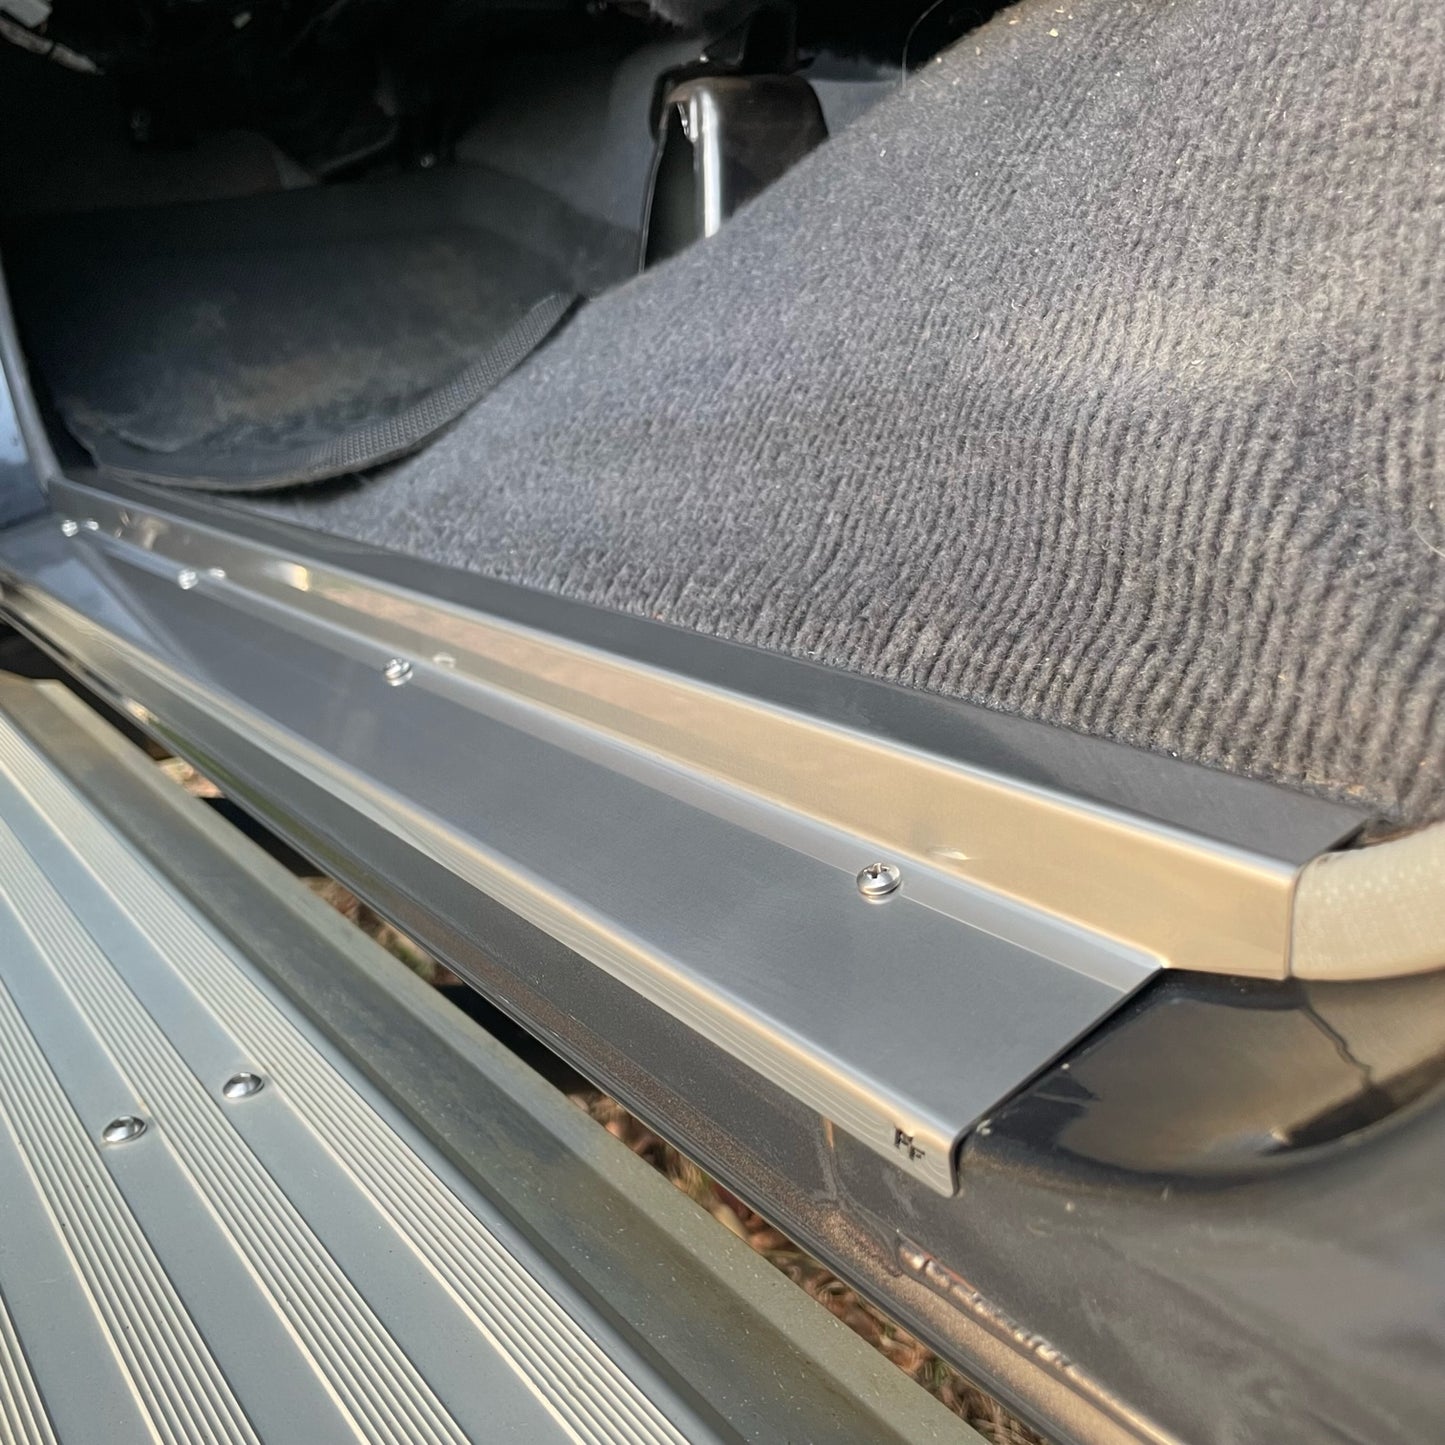 Stainless Steel Sill Trims - Suitable for use with 70 Series LandCruiser